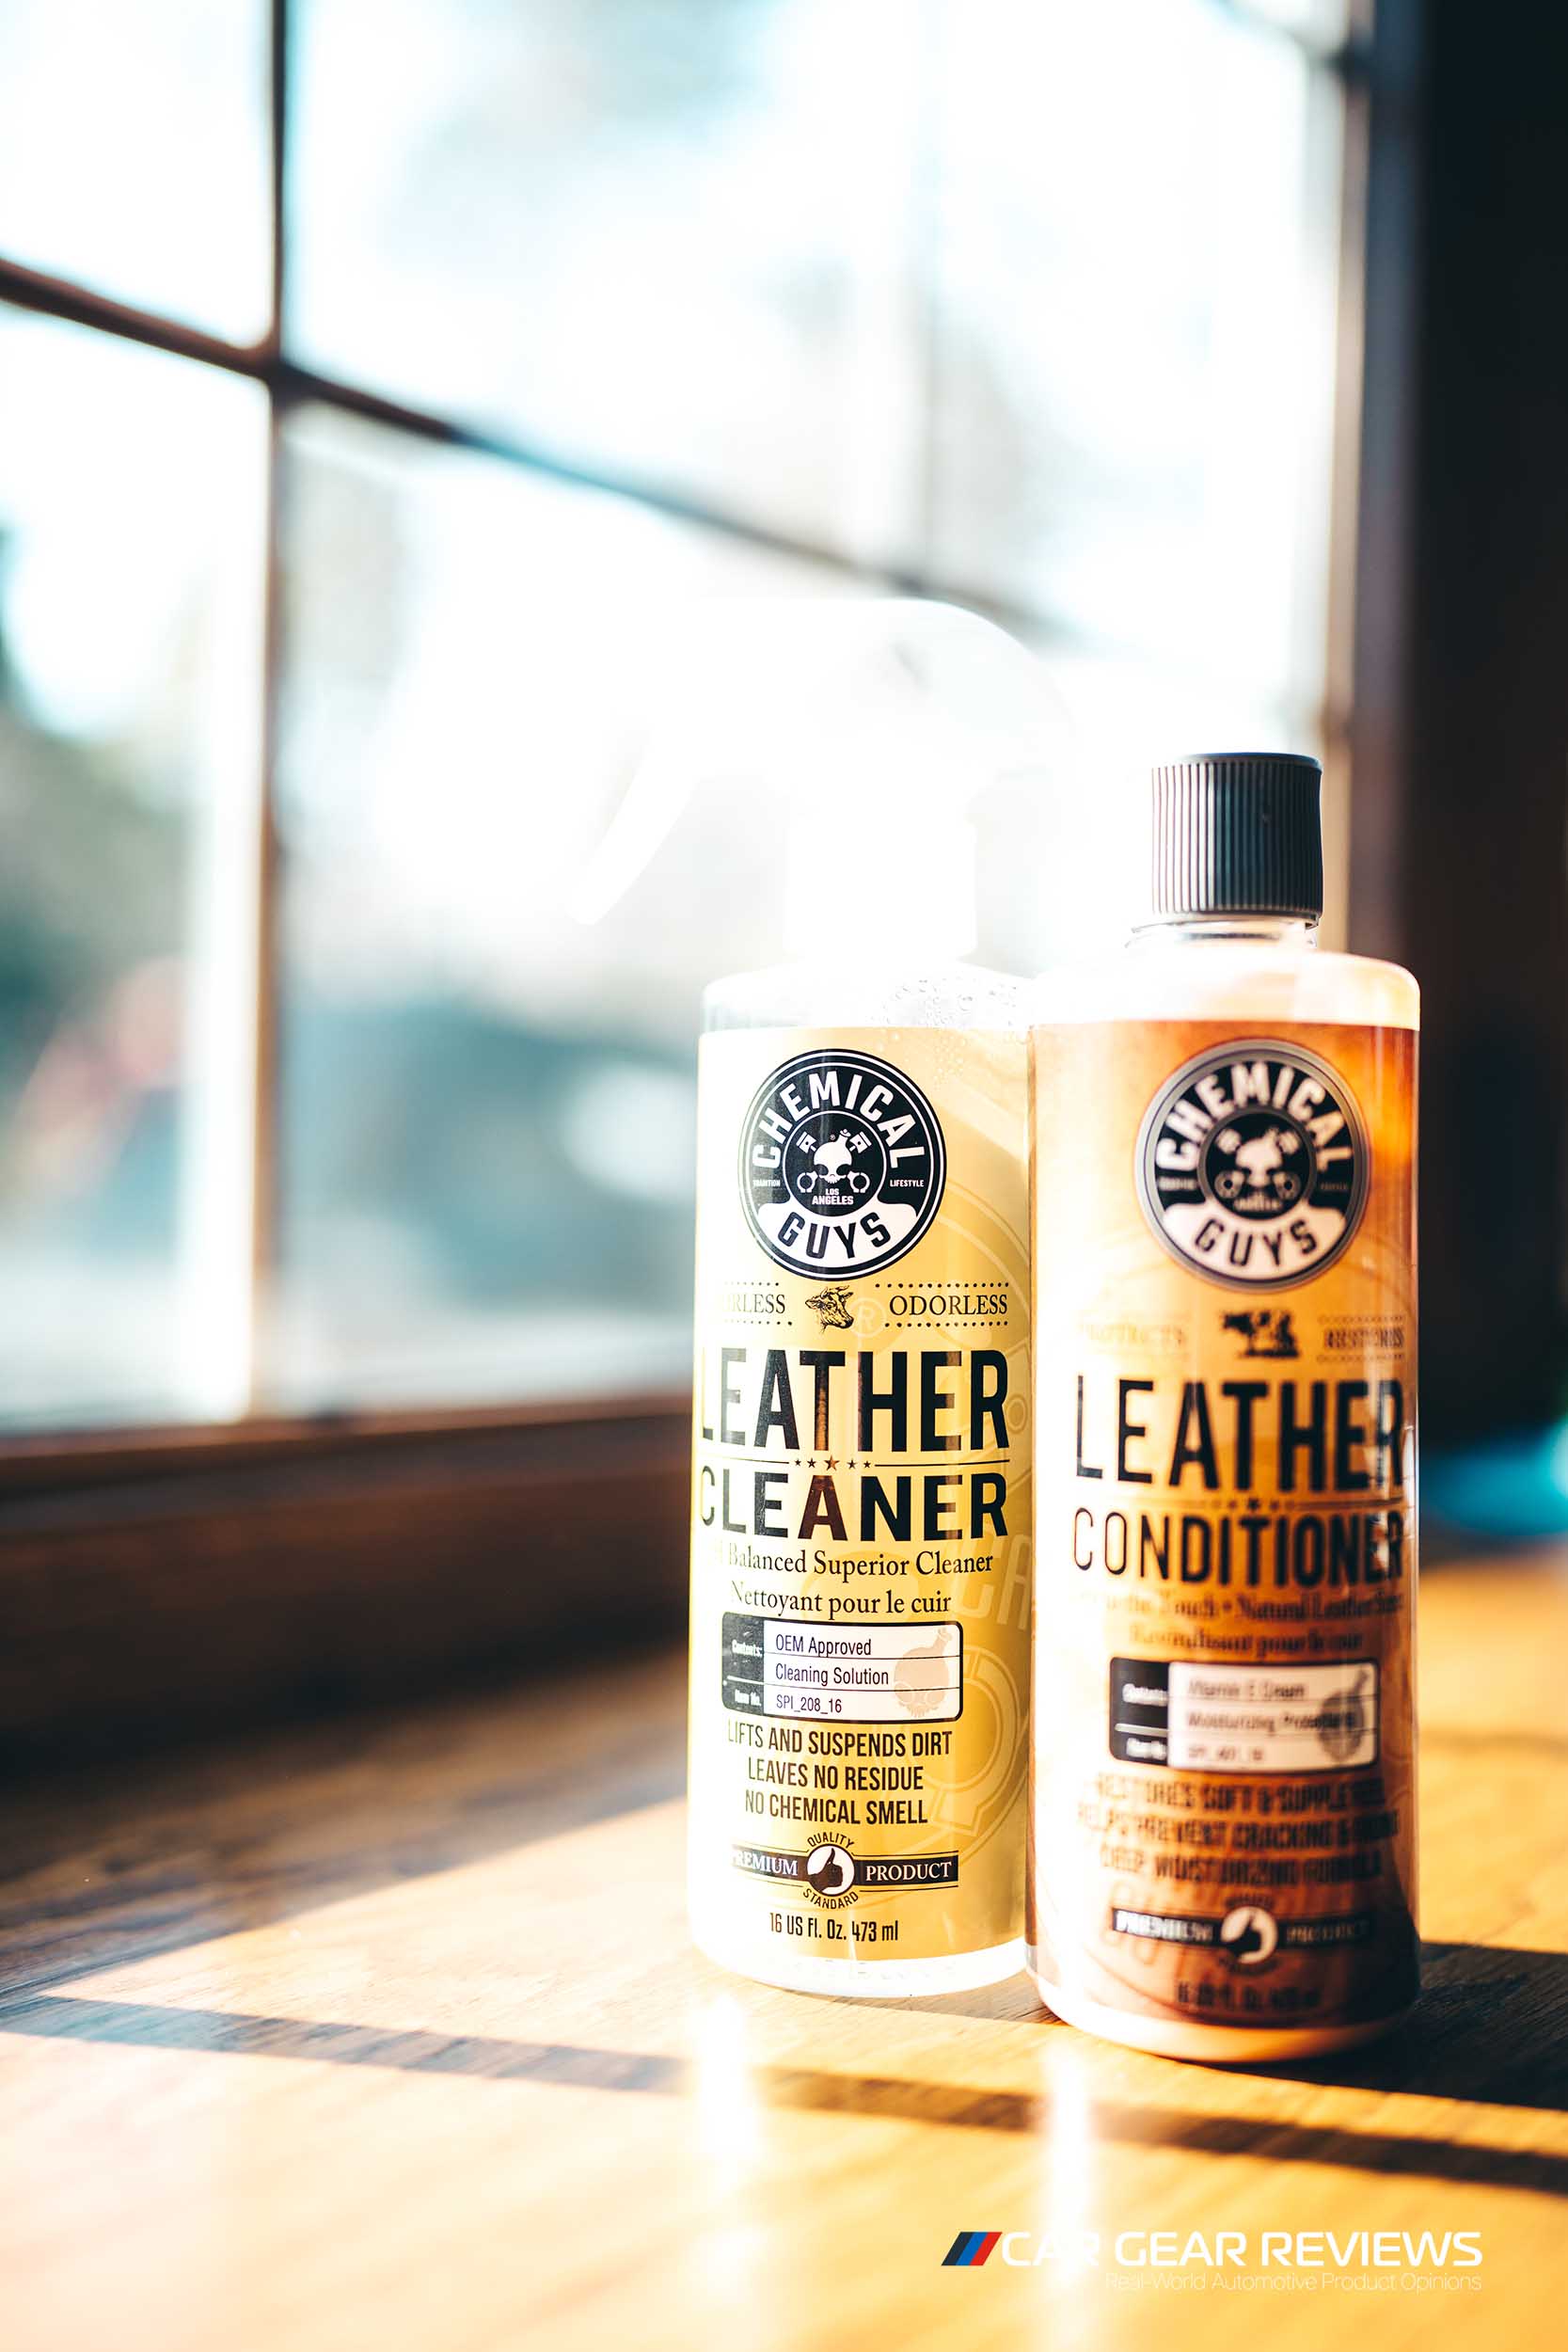 Chemical Guys Leather Care Honest Review 